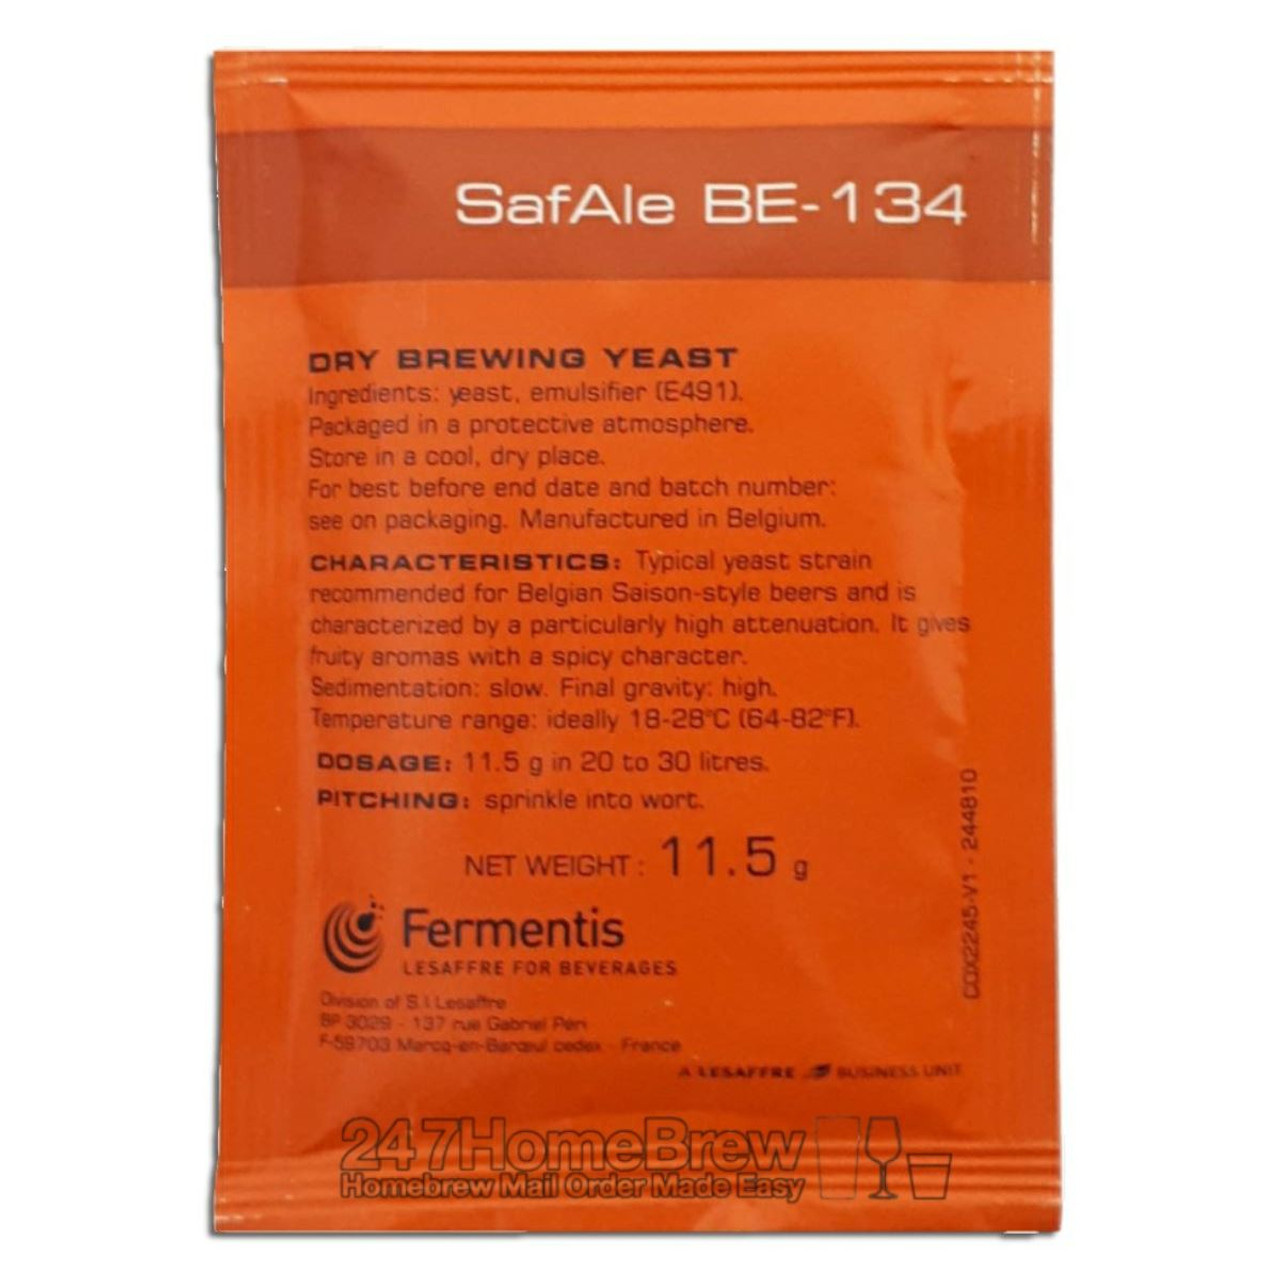 Fermentis Safale BE-134 Beer Yeast Belgian Saison-style Beers 11.5g 20-30L BBE 09/2023